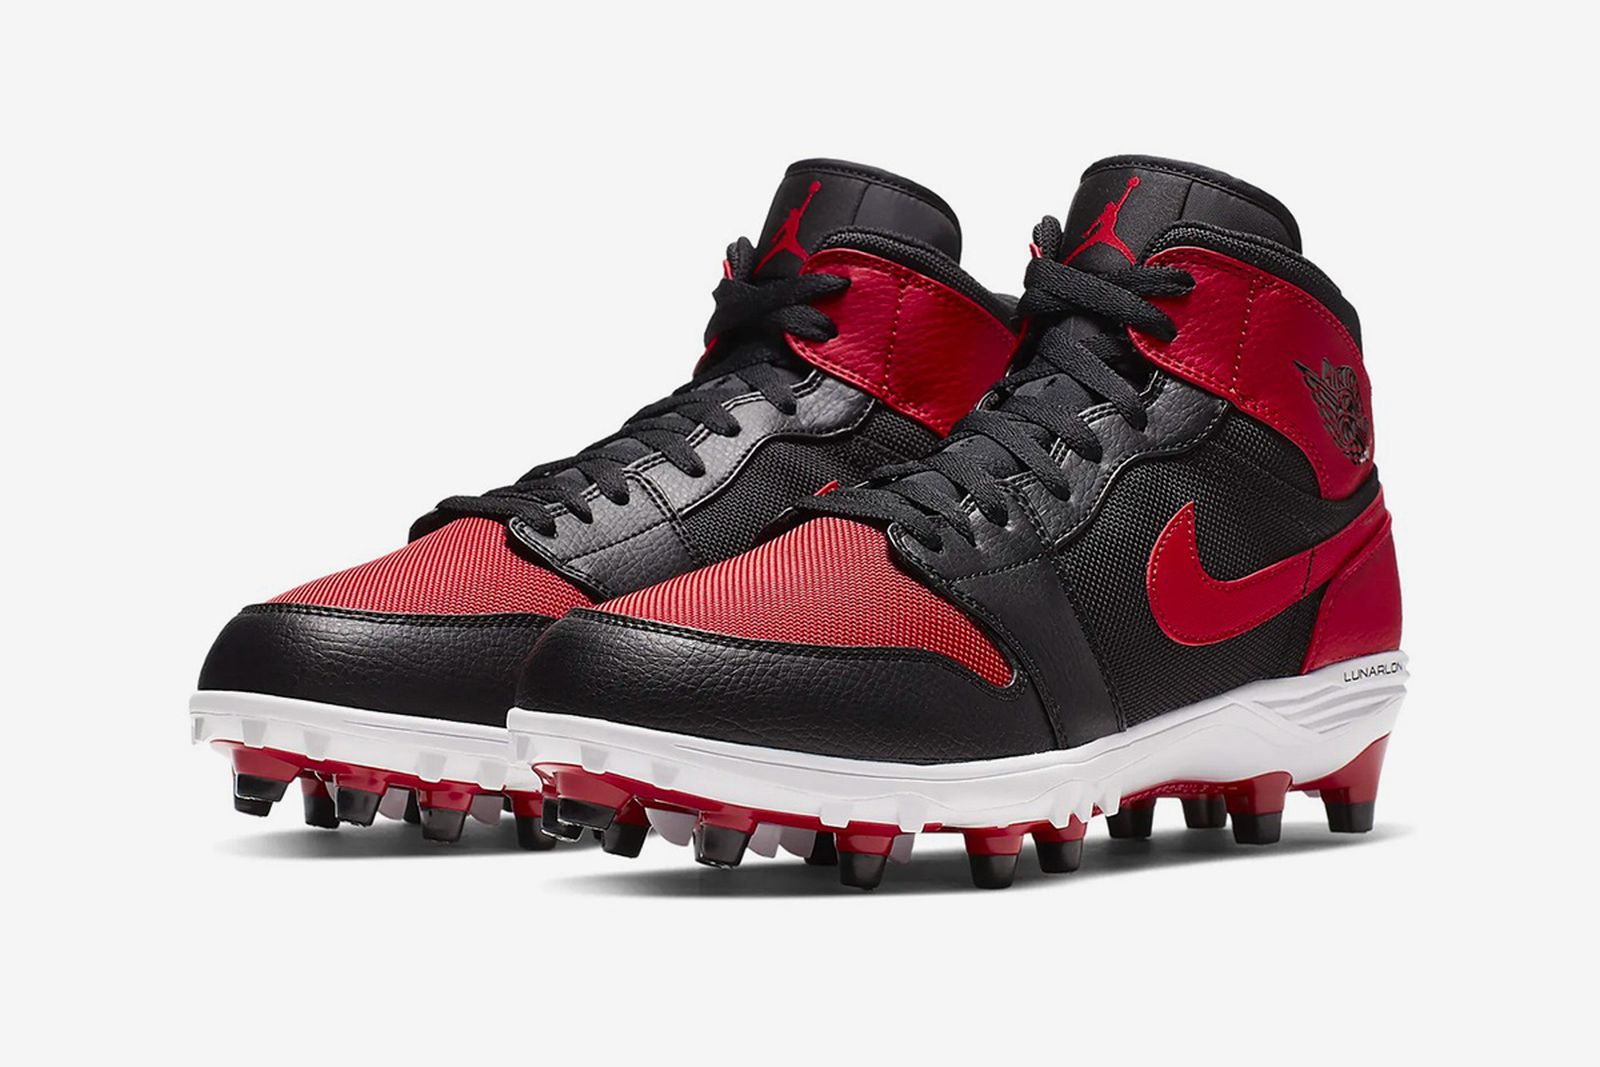 Nike Air Jordan Football Cleat: How to Buy Here Today